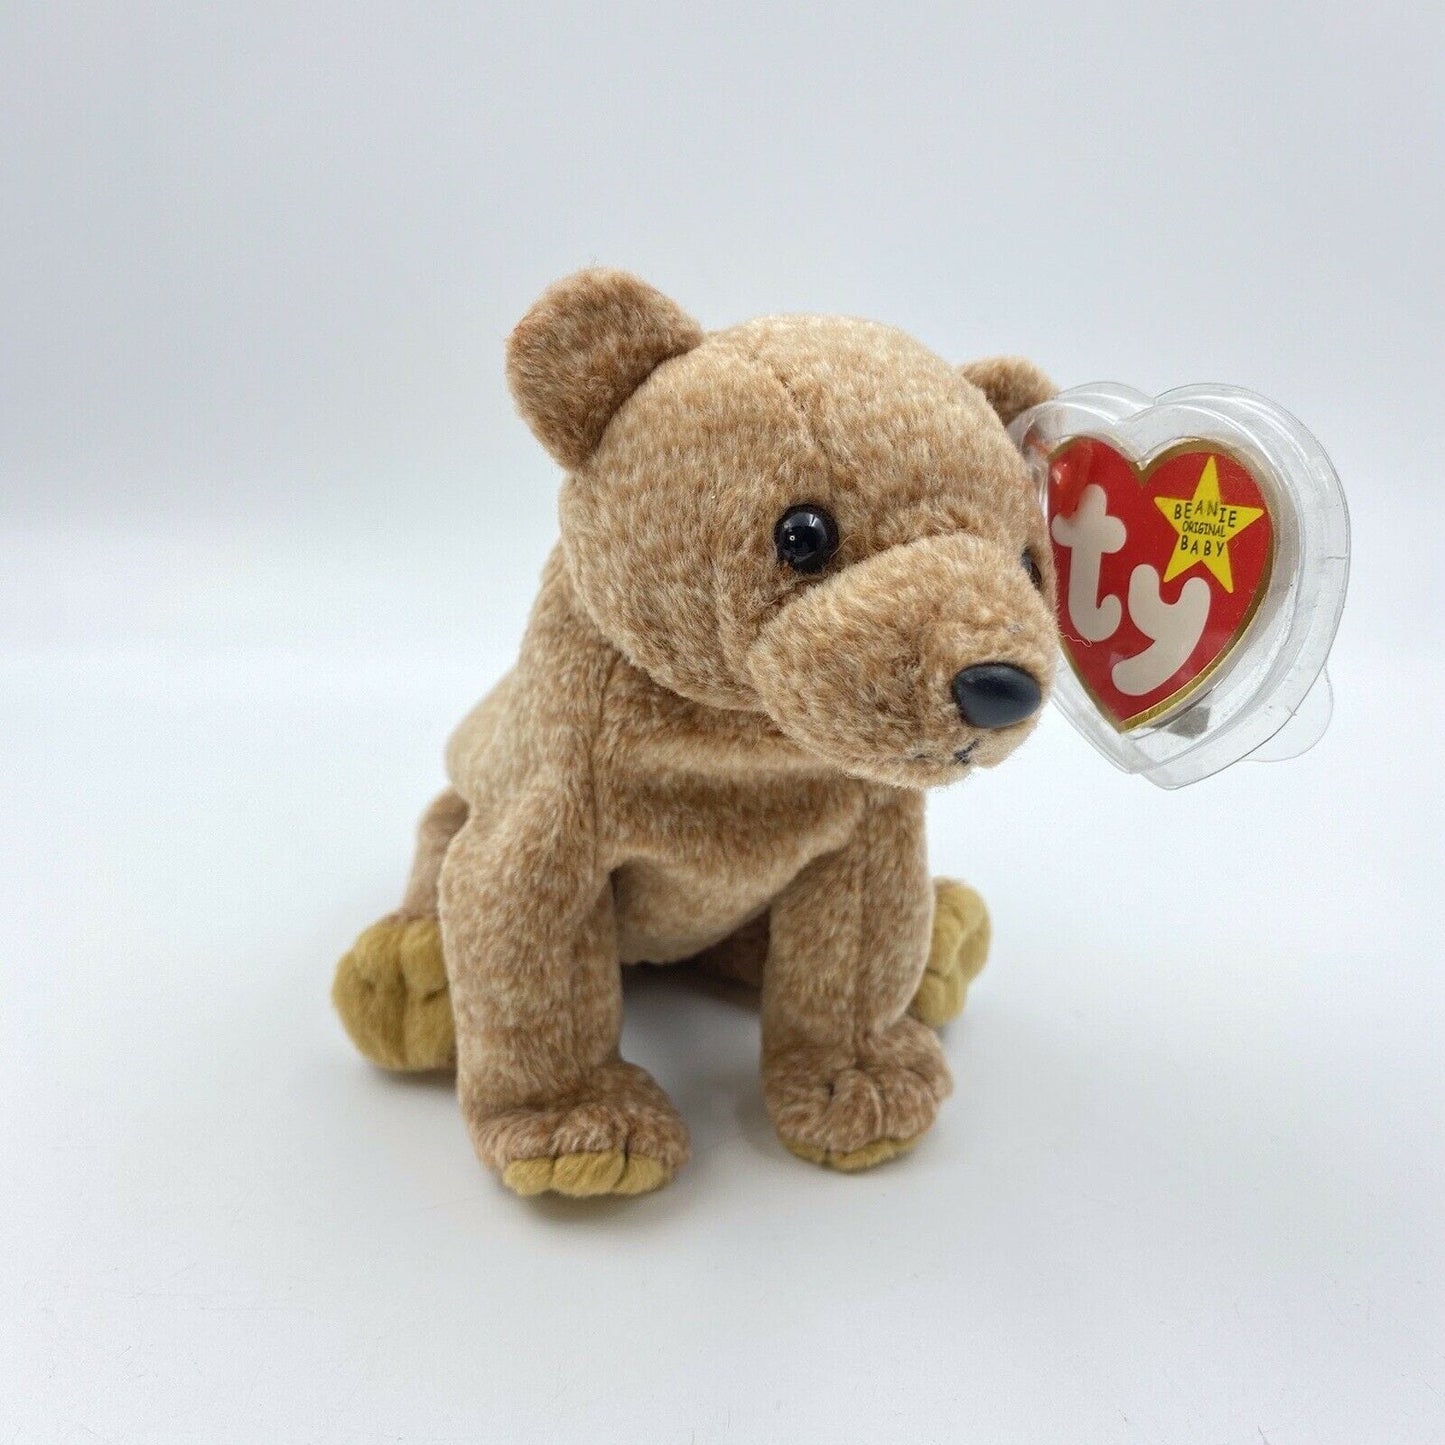 Ty Original Beanie Babies - “Pecan” The Bear - 1999 MINT Condition - Tag Errors